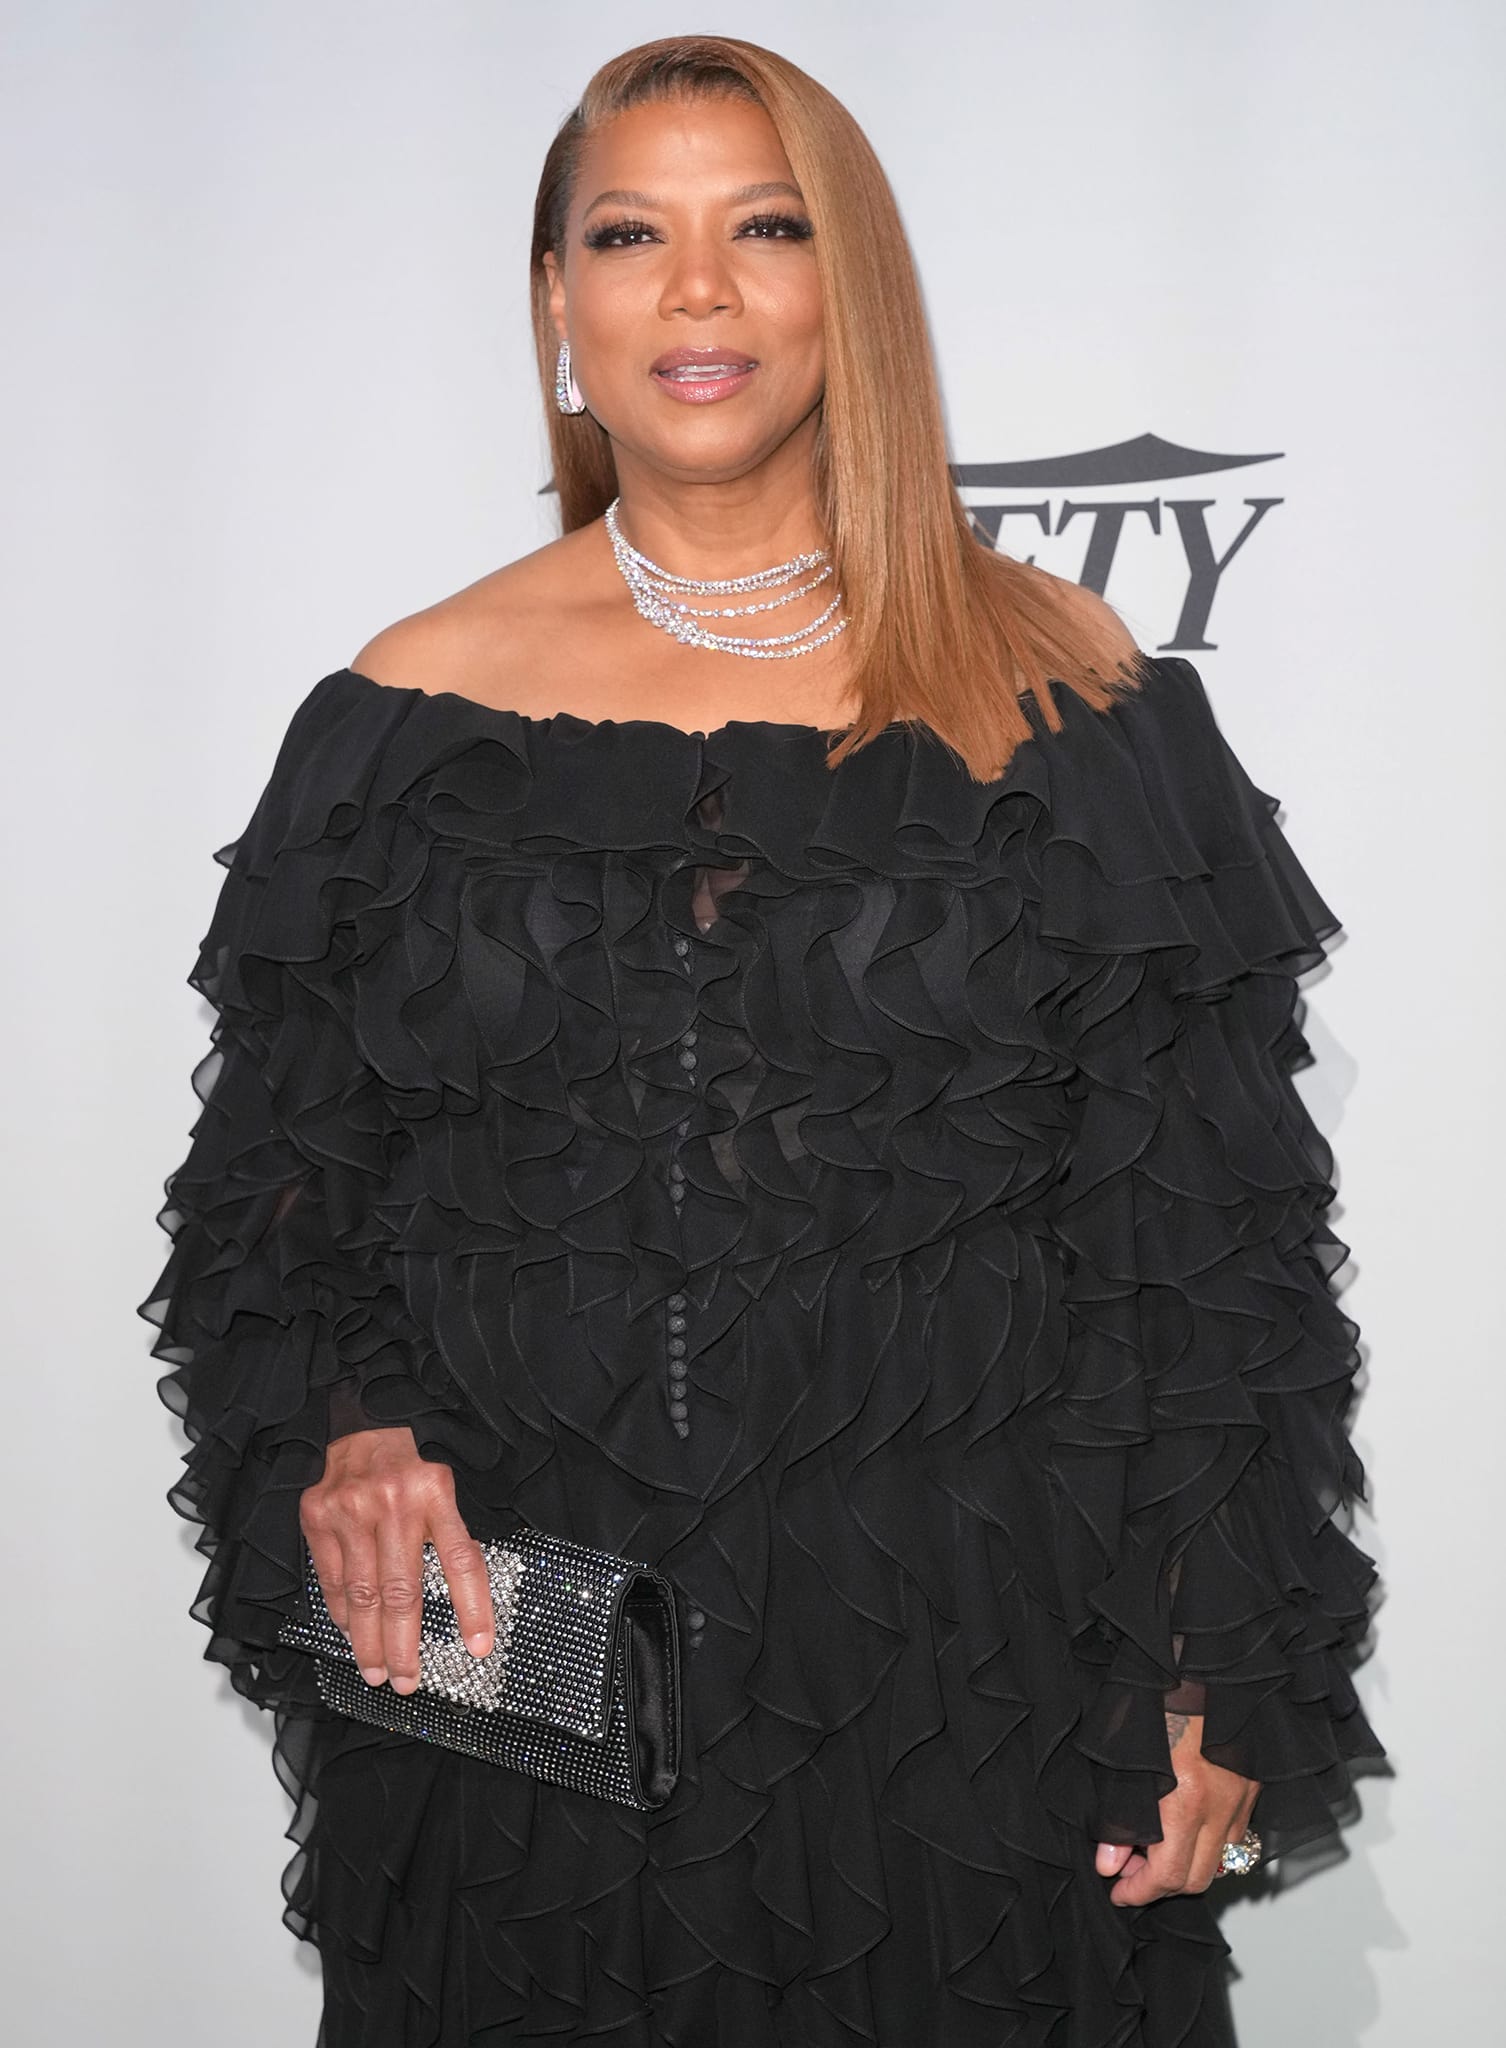 Queen Latifah At Variety Power Of Women 2022 Event On May 5, 2022